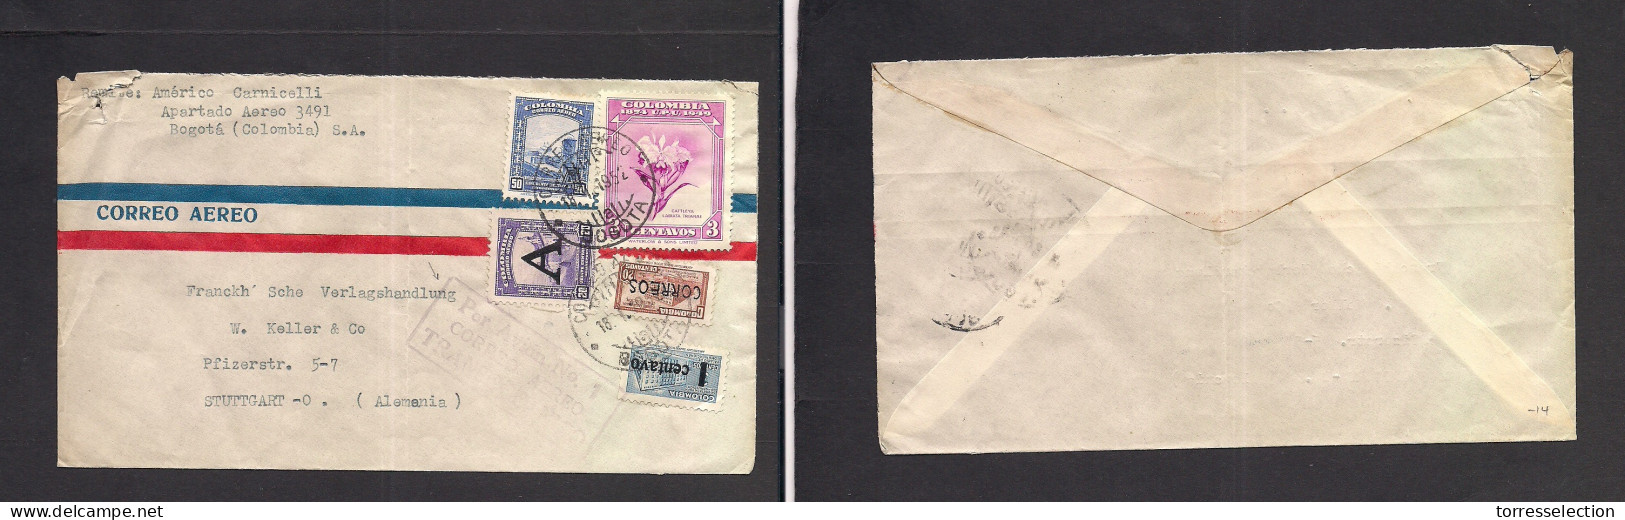 COLOMBIA. 1952 (18 Jan) Bogota - Germany, Stuttgart. Air - 1 Multifkd Env, Ovptd Issues + Special Air Cachet. Fine. - Colombia